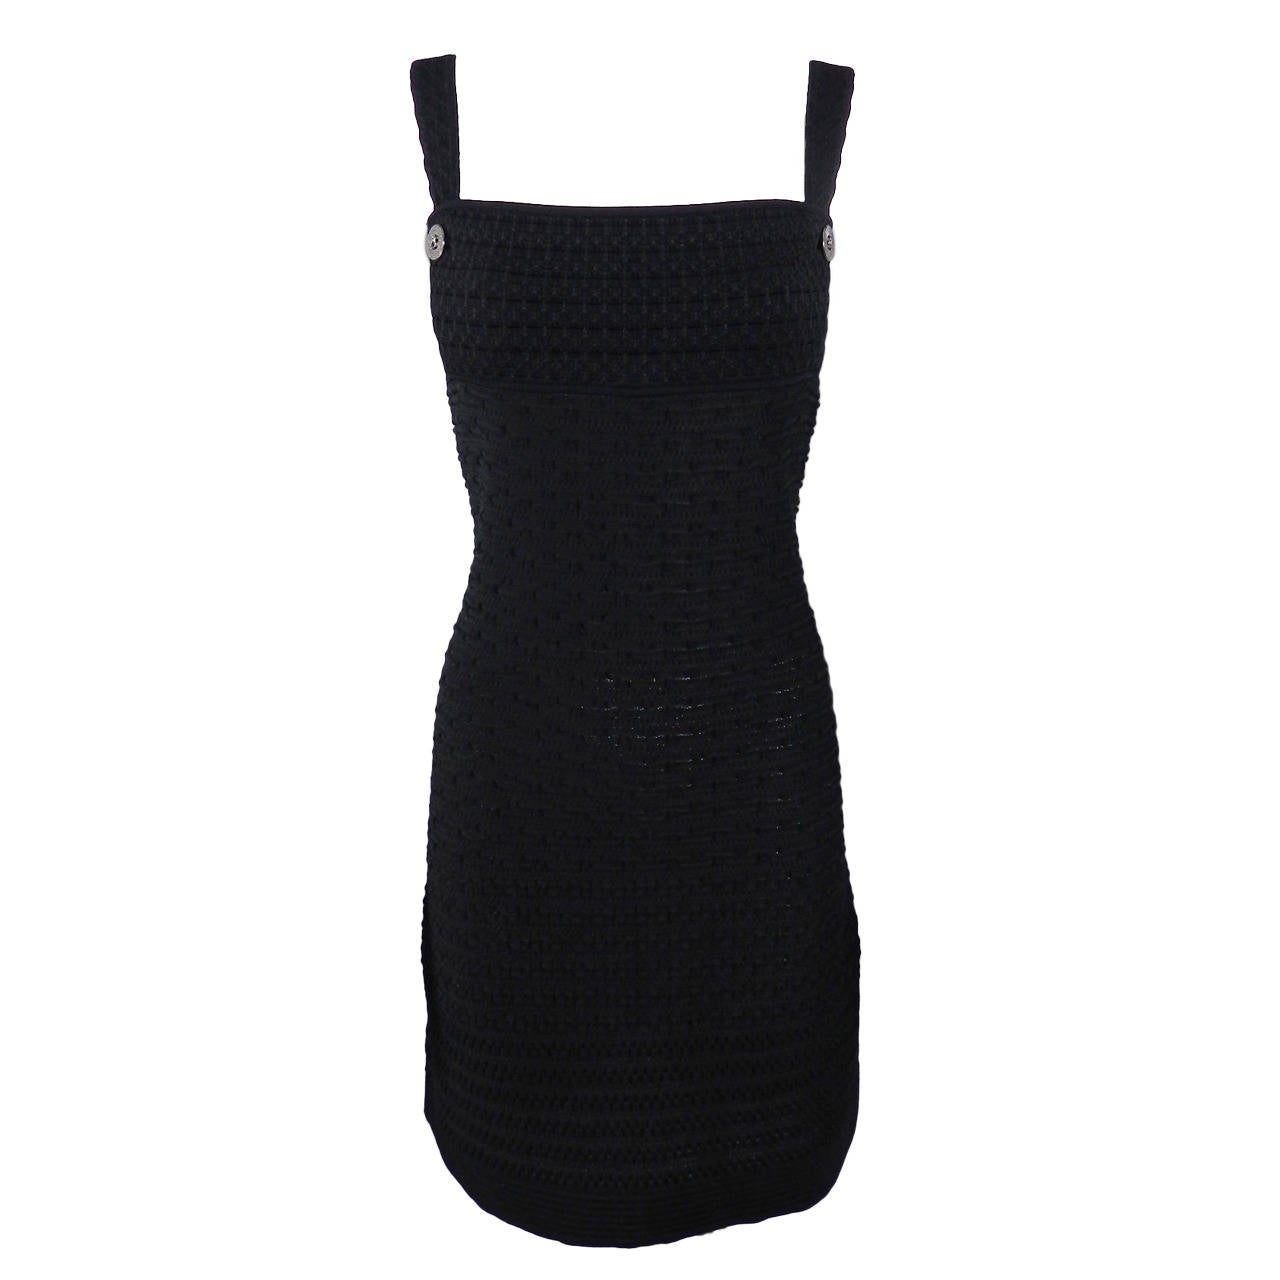 Chanel Black Textured Stretch Jersey Dress with Back Zipper